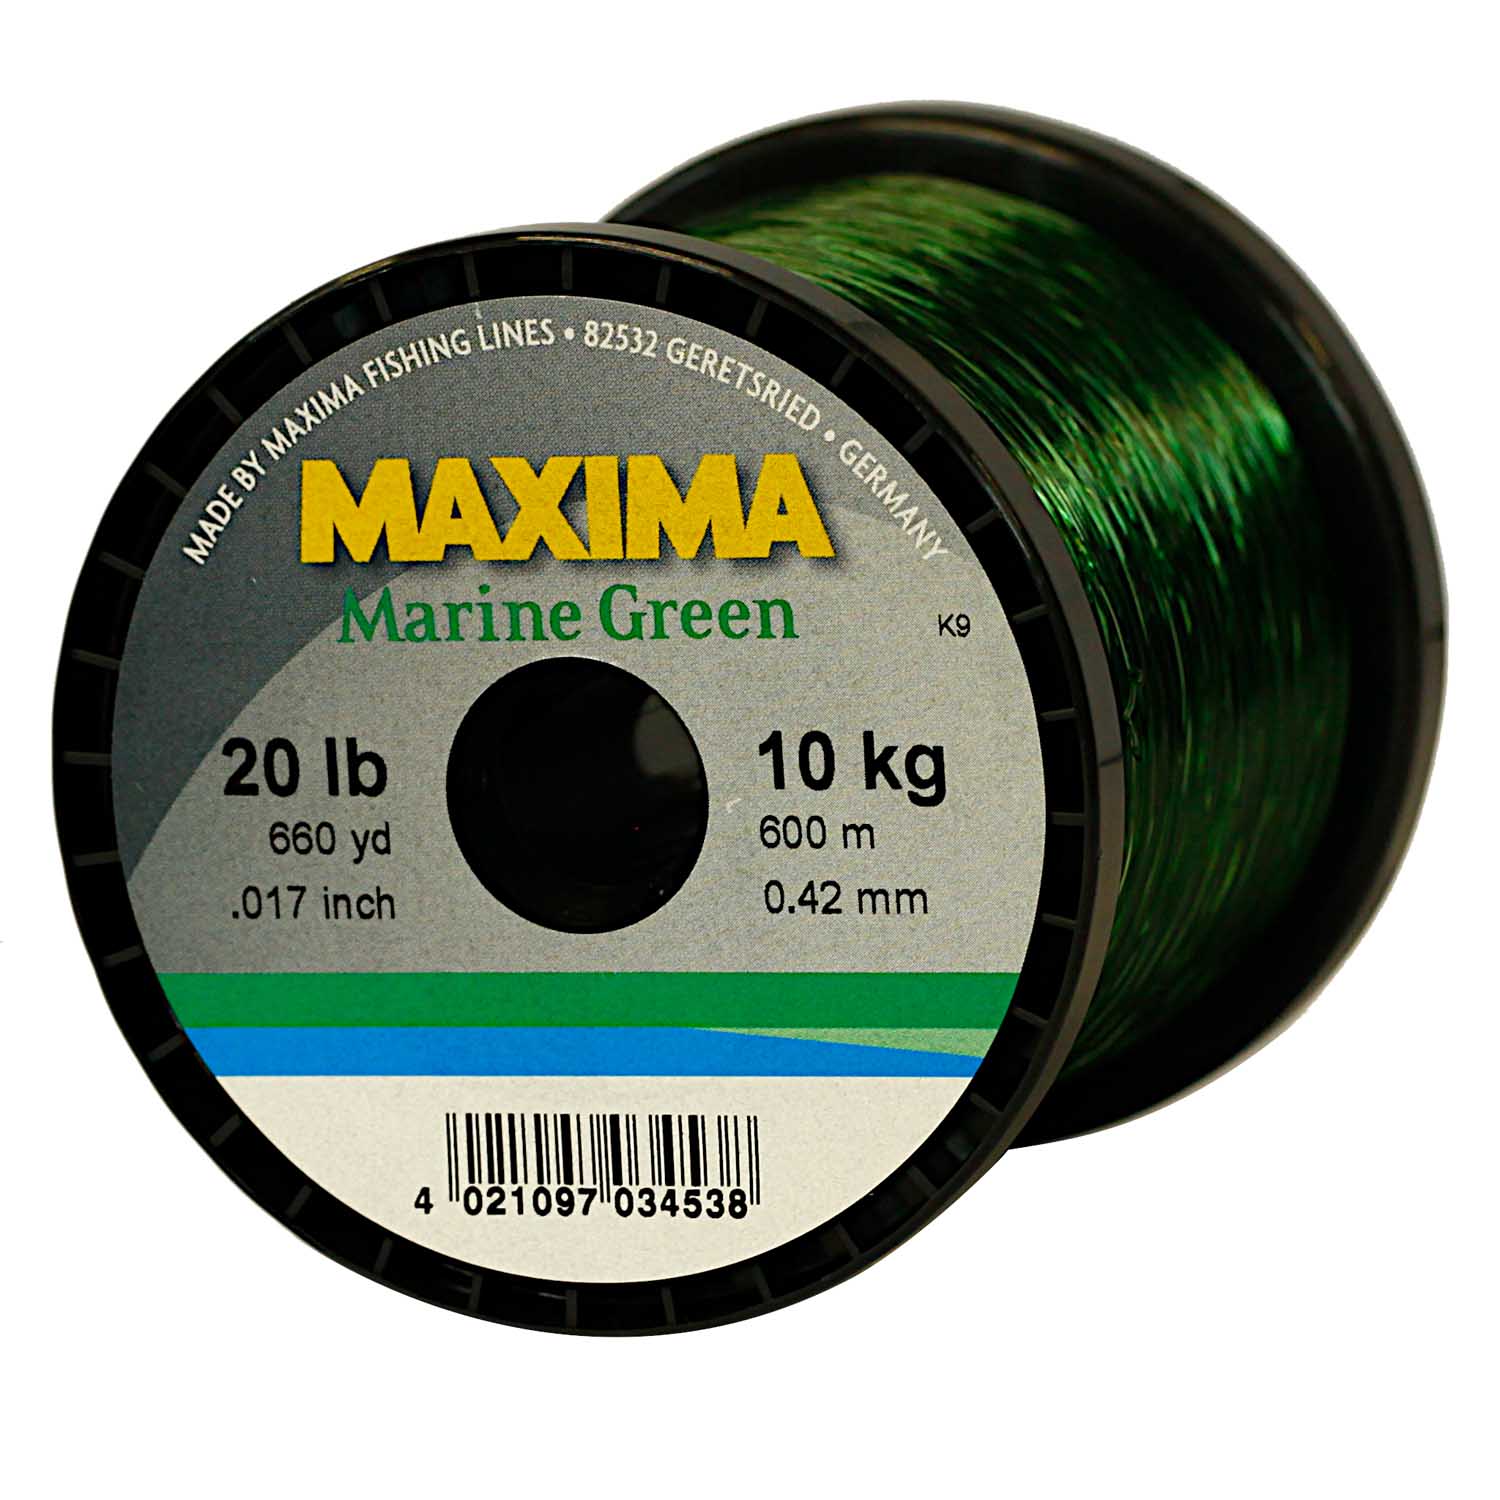 https://www.showspace.co.za/showspaceimages/kingfisher/MAXIMA_M.GREEN_20lb_10kg_600m_tnbola.jpg